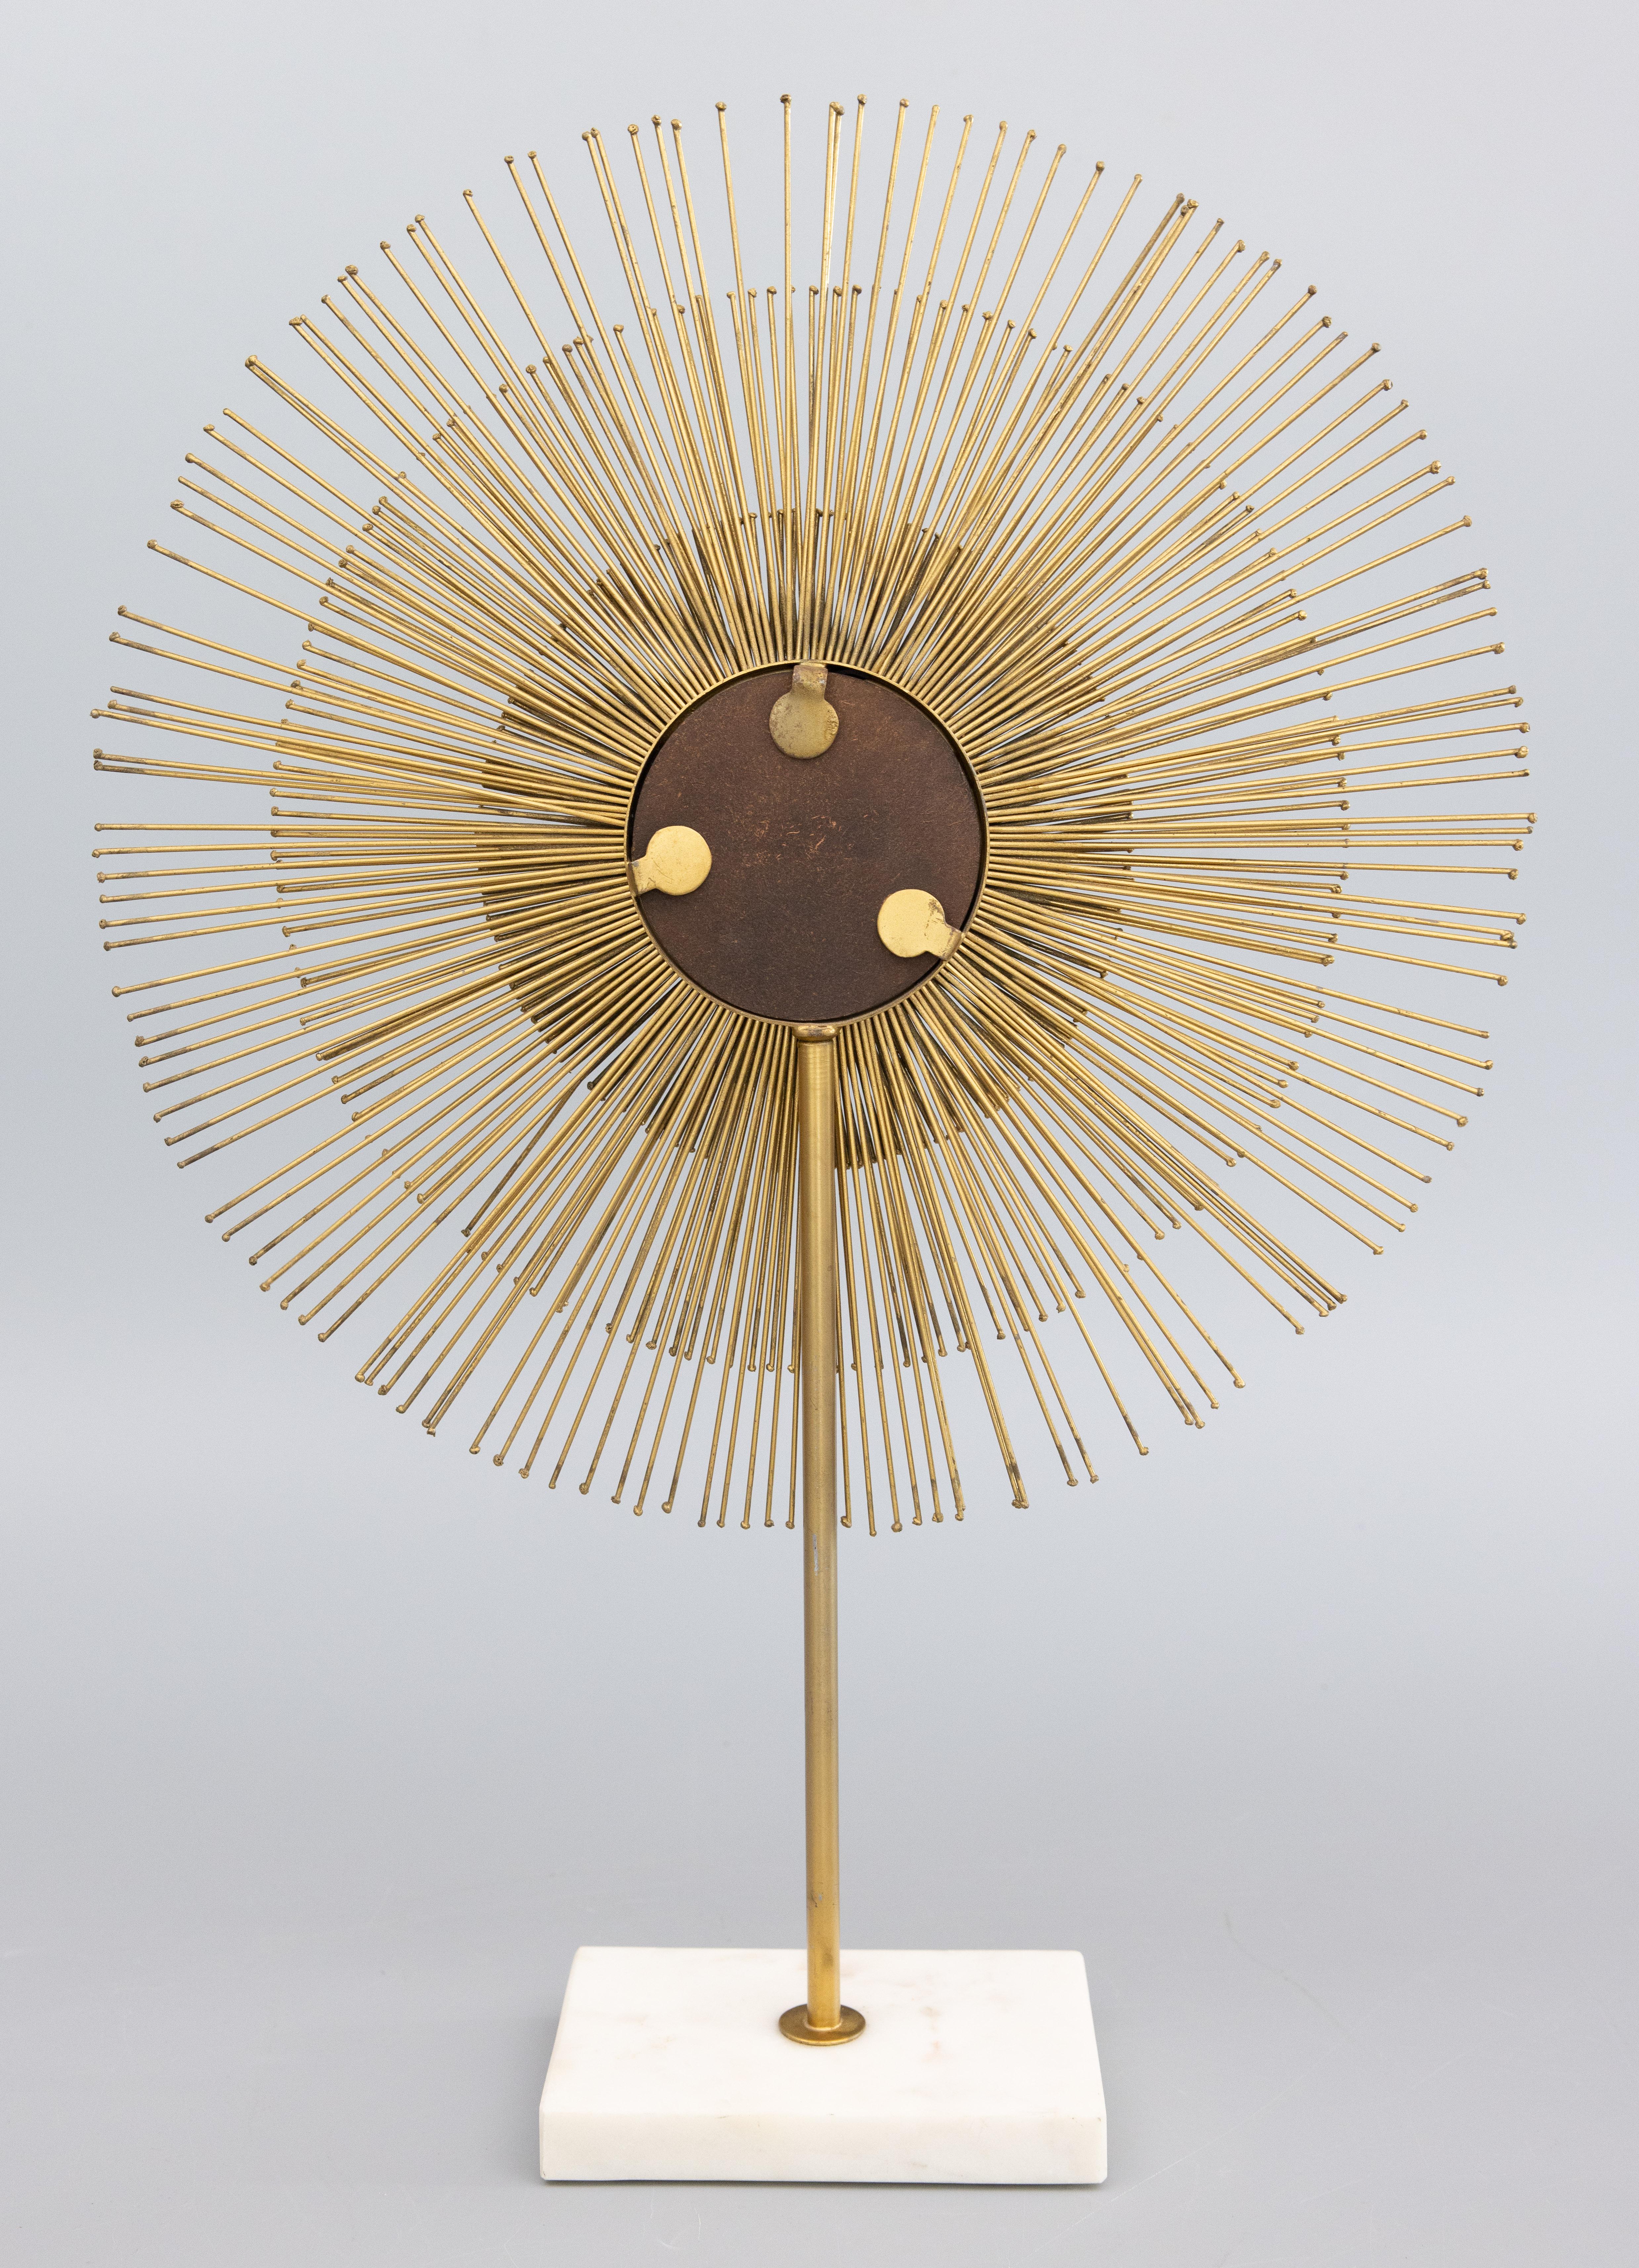 20th Century Mid-Century Modern French Gilt Metal Sunburst Table Mirror Sculpture on a Marble For Sale